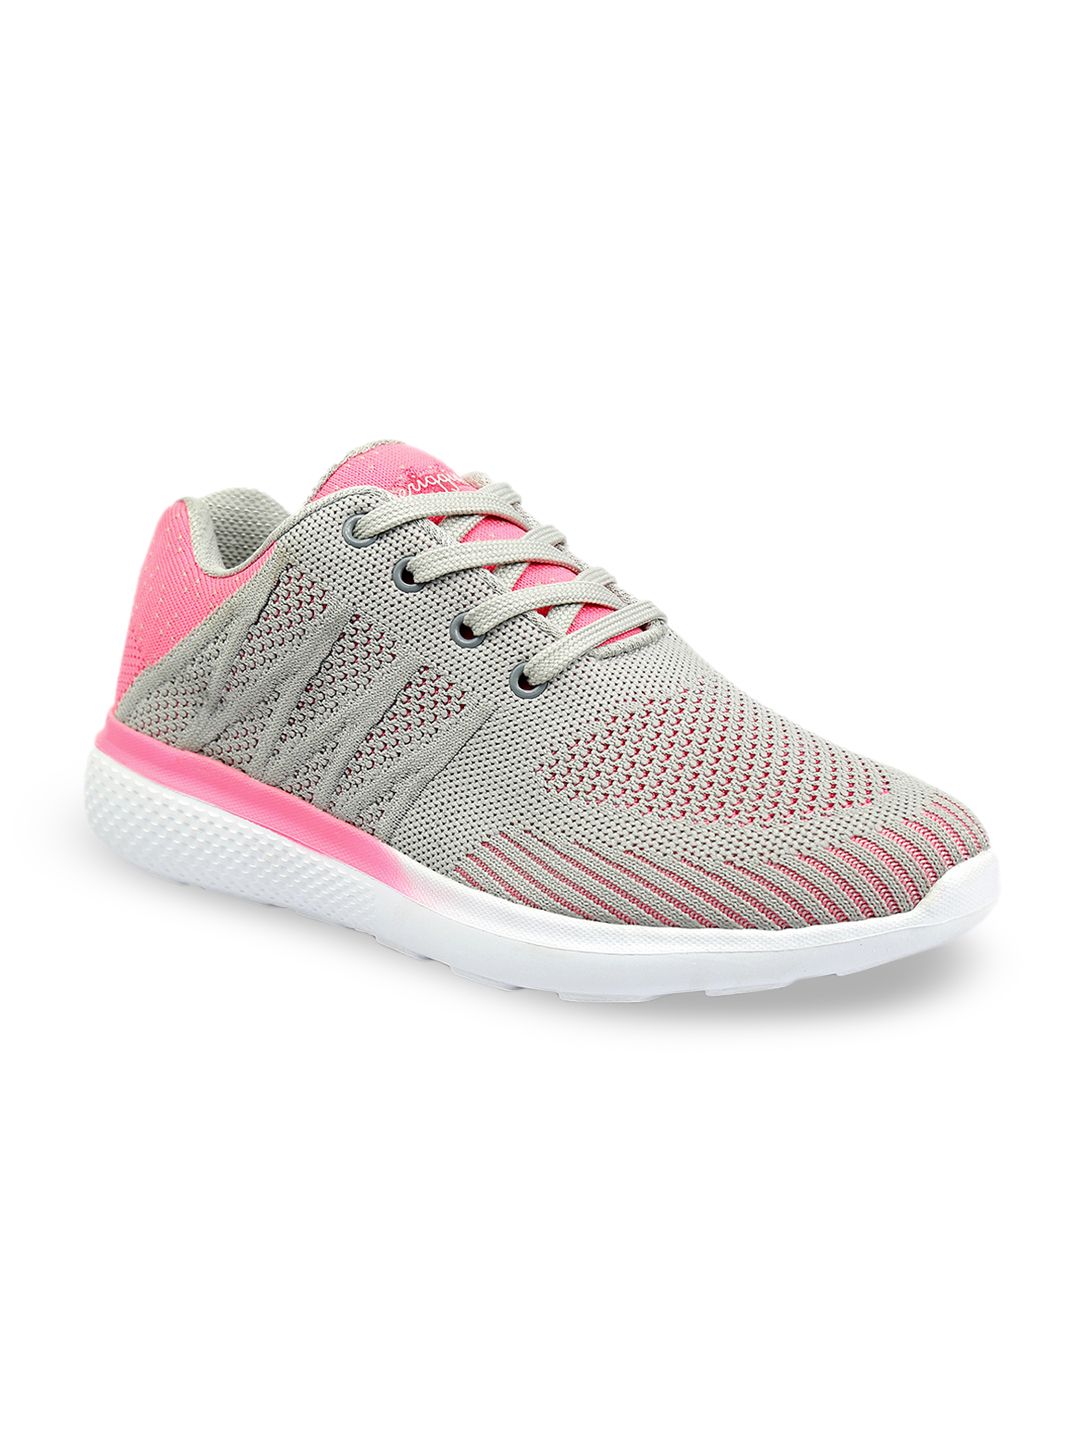 meriggiare Women Grey Mesh Training or Gym Shoes Price in India